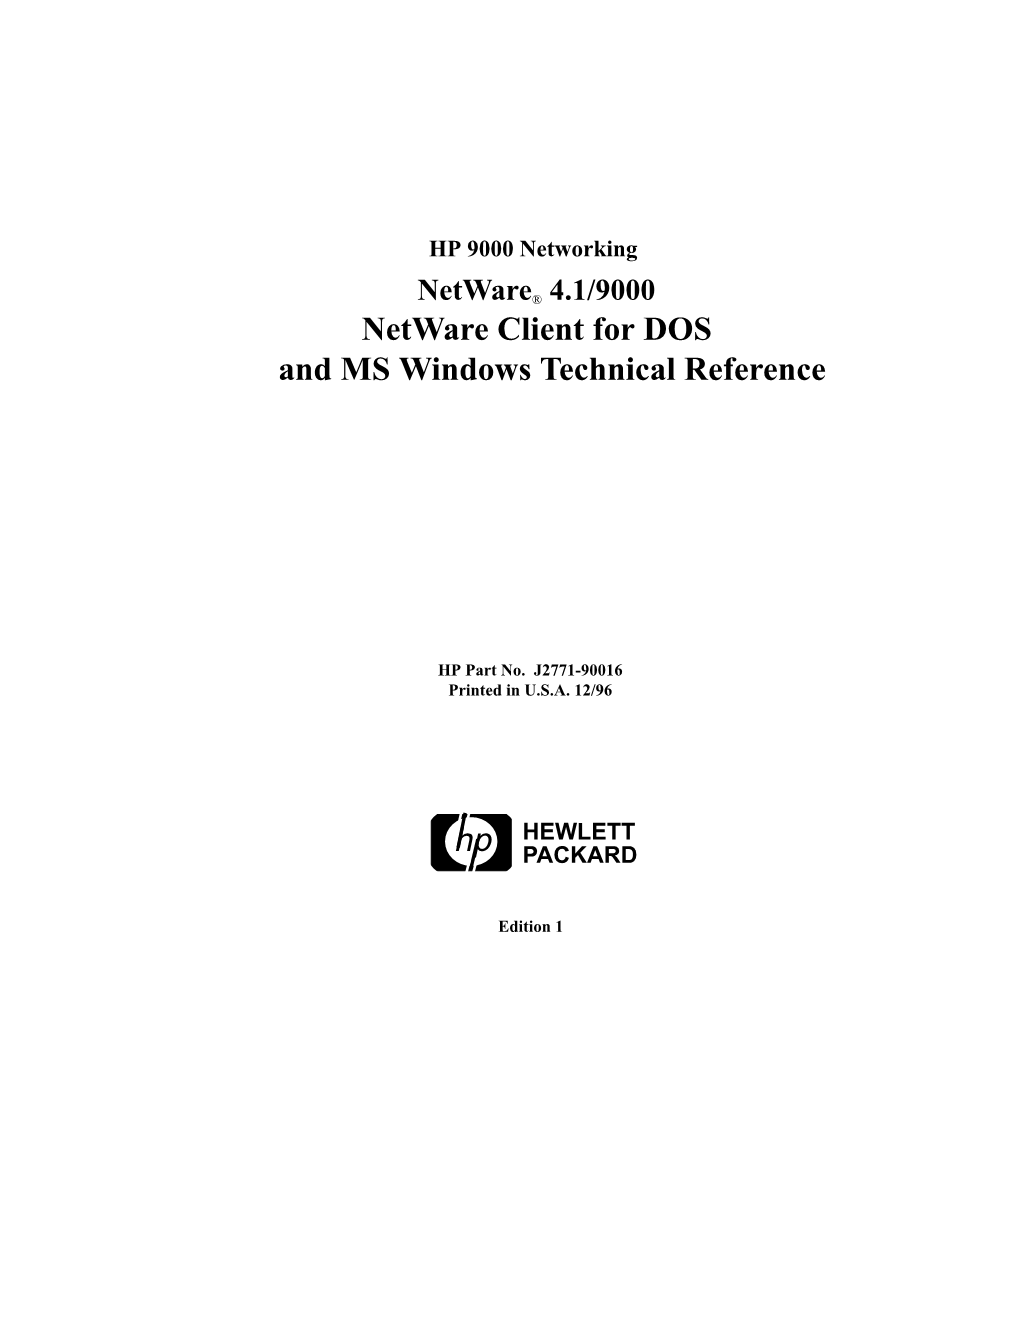 Netware Client for DOS and MS Windows Technical Reference